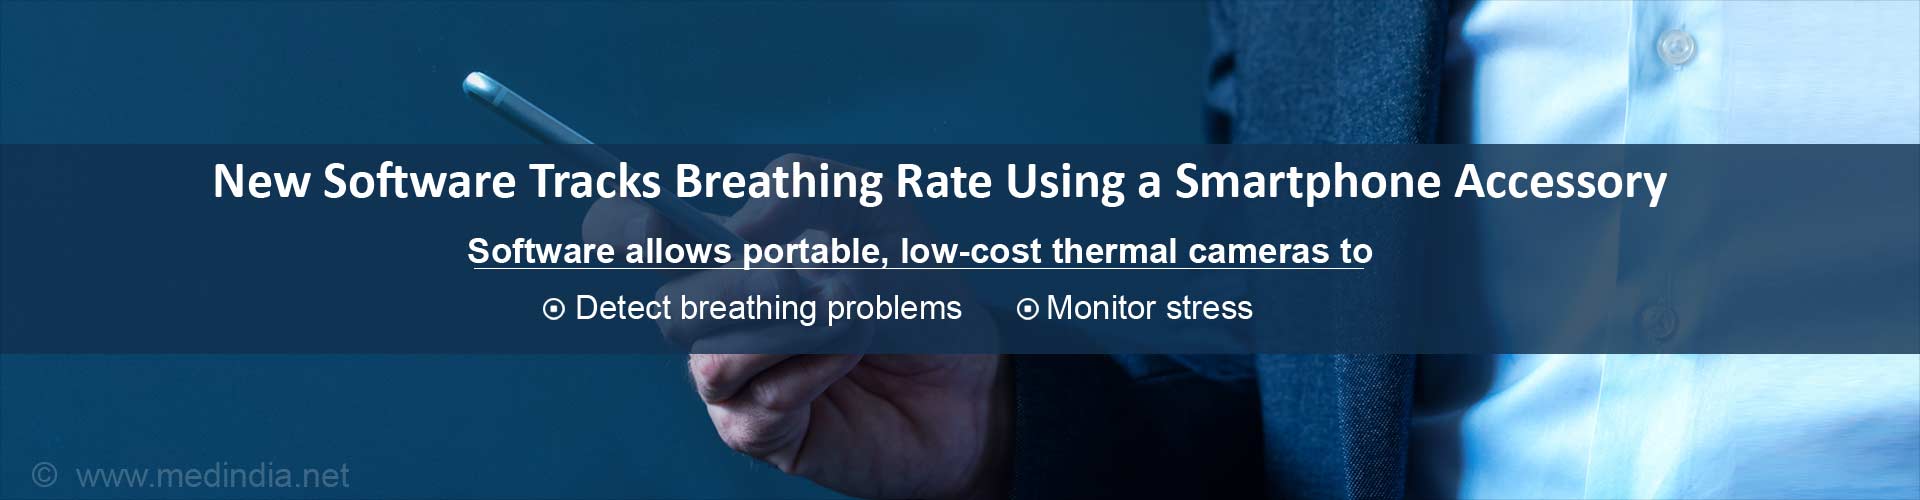 New software tracks breathing rate using a smartphone accessory
Software allows portable, low-cost thermal cameras to:
- Detect breathing problems
- Monitor stress 